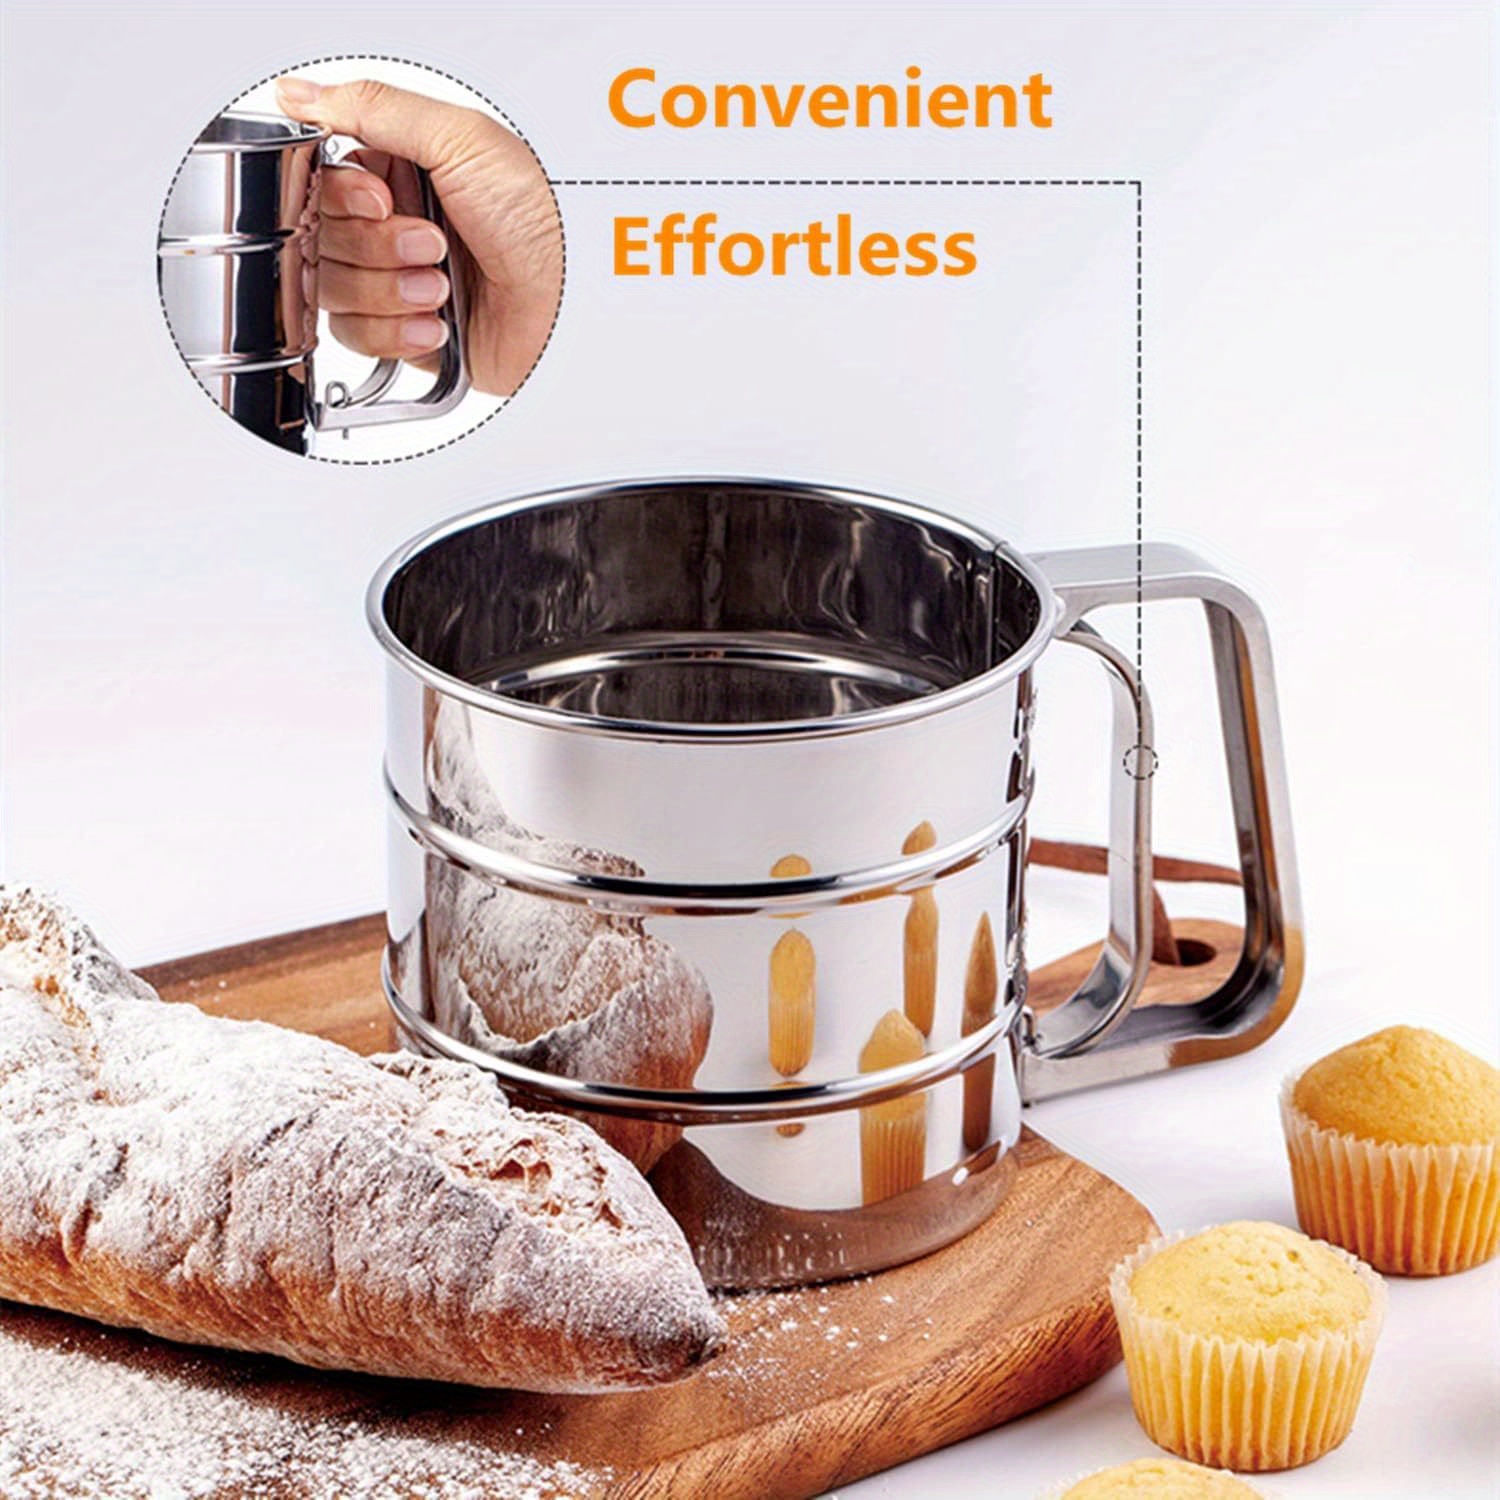 Electric Flour Sifter Handheld Battery Operated Flour Strainer Plastic Cup Shape Powder Shaker Kitchen Cooking Baking Pastry Tools